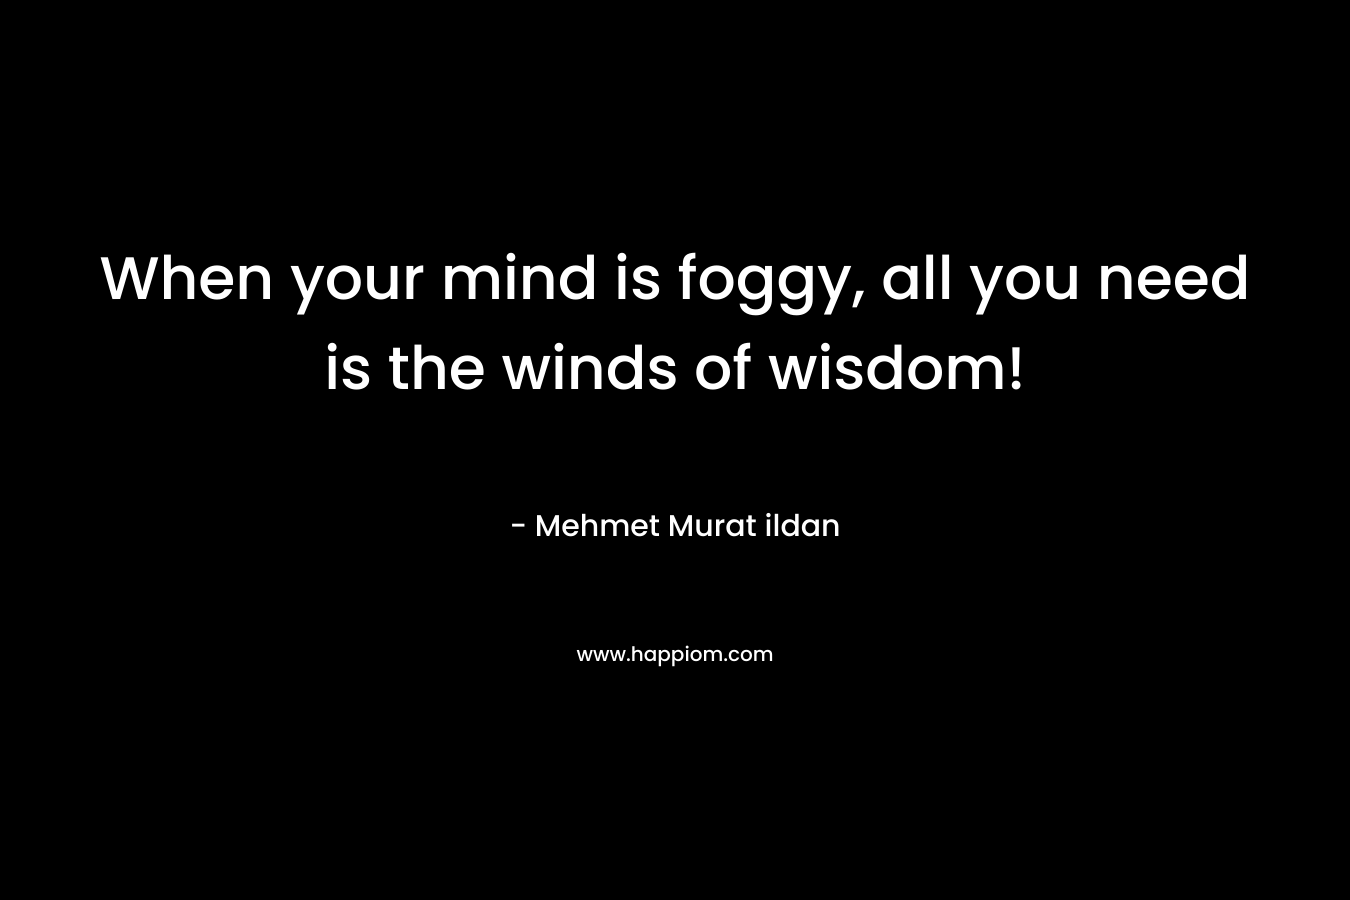 When your mind is foggy, all you need is the winds of wisdom! – Mehmet Murat ildan